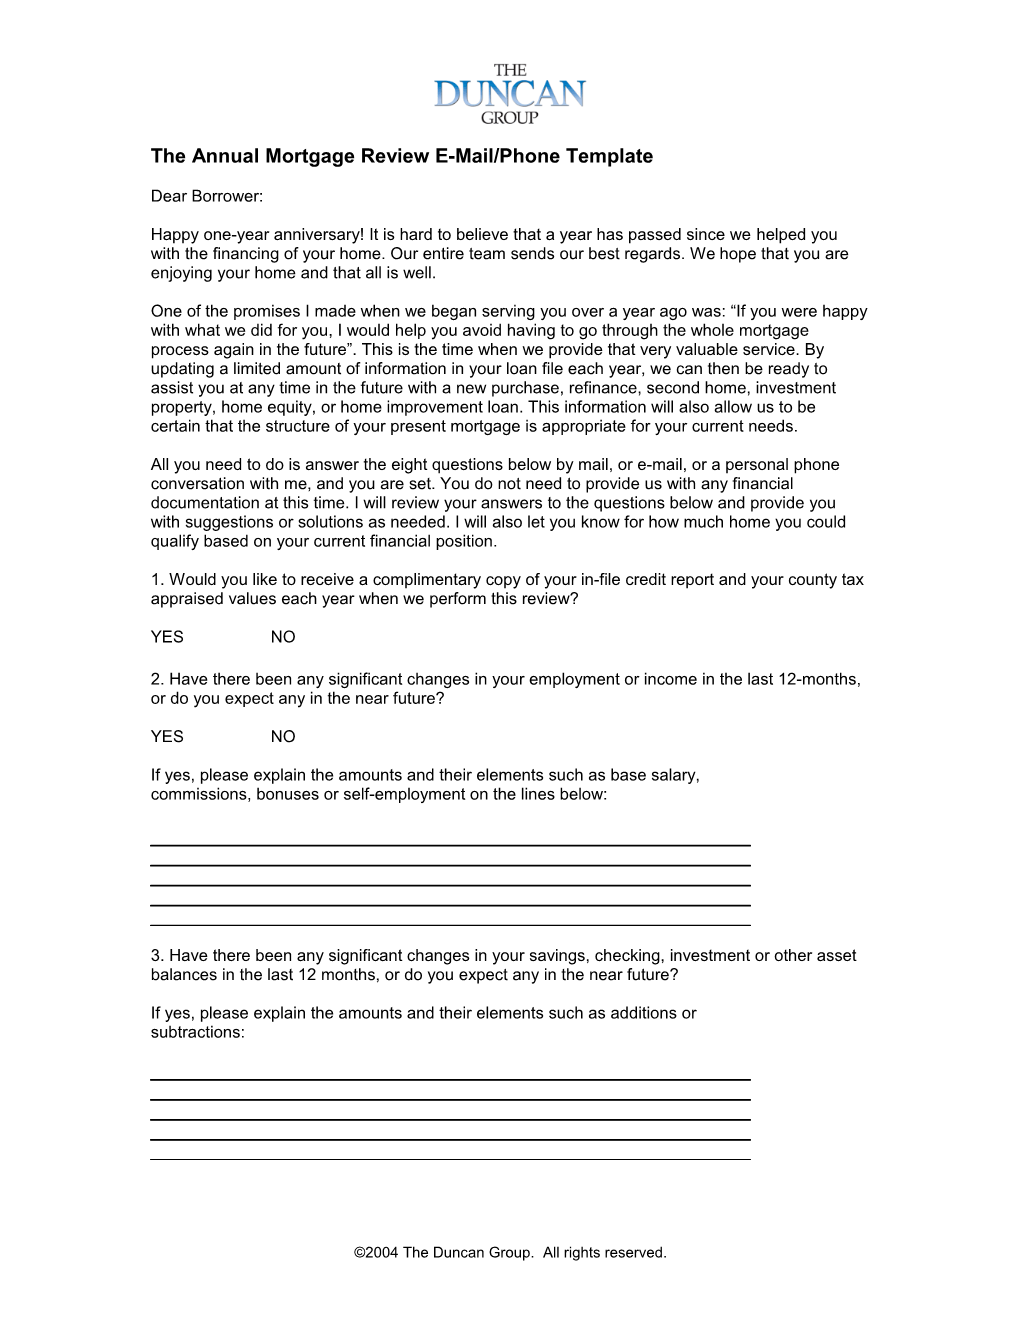 The Annual Mortgage Review E-Mail/Phone Template